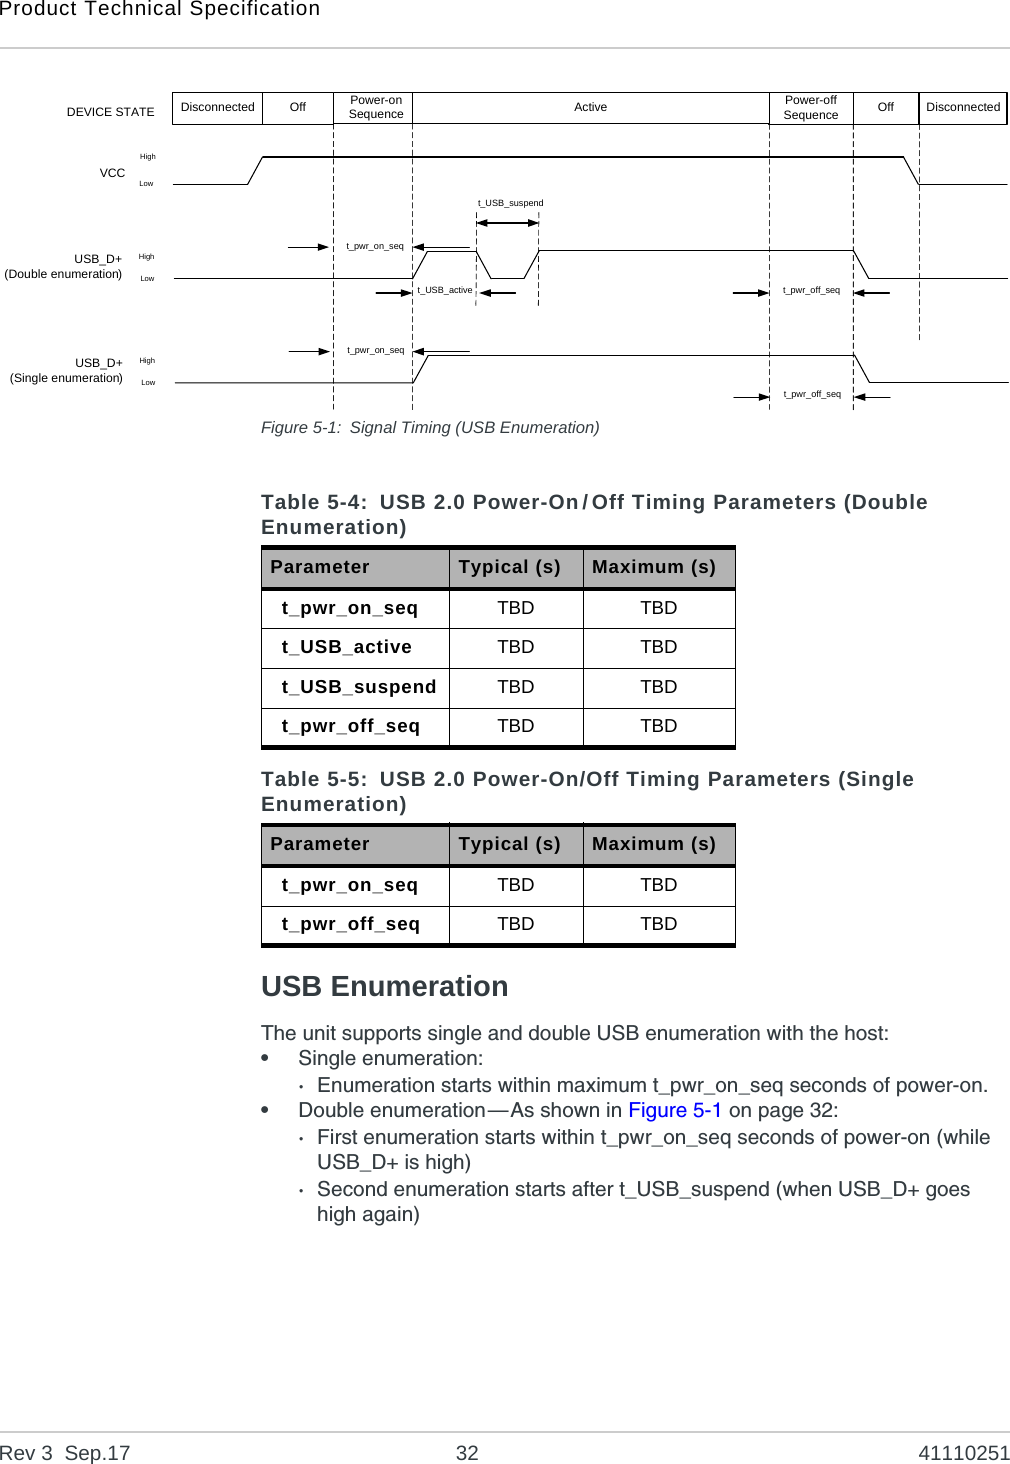 Product Technical SpecificationRev 3  Sep.17 32 41110251Figure 5-1: Signal Timing (USB Enumeration)USB EnumerationThe unit supports single and double USB enumeration with the host:•Single enumeration:·Enumeration starts within maximum t_pwr_on_seq seconds of power-on.•Double enumeration—As shown in Figure 5-1 on page 32:·First enumeration starts within t_pwr_on_seq seconds of power-on (while USB_D+ is high)·Second enumeration starts after t_USB_suspend (when USB_D+ goes high again)Disconnected Power-on SequenceUSB_D+(Double enumeration)Power-off Sequence DisconnectedActiveDEVICE STATEHighLowOff OffHighVCC Lowt_pwr_on_seqt_USB_activet_USB_suspendt_pwr_off_seqUSB_D+(Single enumeration)HighLowt_pwr_on_seqt_pwr_off_seqTable 5-4: USB 2.0 Power-On/Off Timing Parameters (Double Enumeration)Parameter Typical (s) Maximum (s)t_pwr_on_seq TBD TBDt_USB_active TBD TBDt_USB_suspend TBD TBDt_pwr_off_seq TBD TBDTable 5-5: USB 2.0 Power-On/Off Timing Parameters (Single Enumeration)Parameter Typical (s) Maximum (s)t_pwr_on_seq TBD TBDt_pwr_off_seq TBD TBD